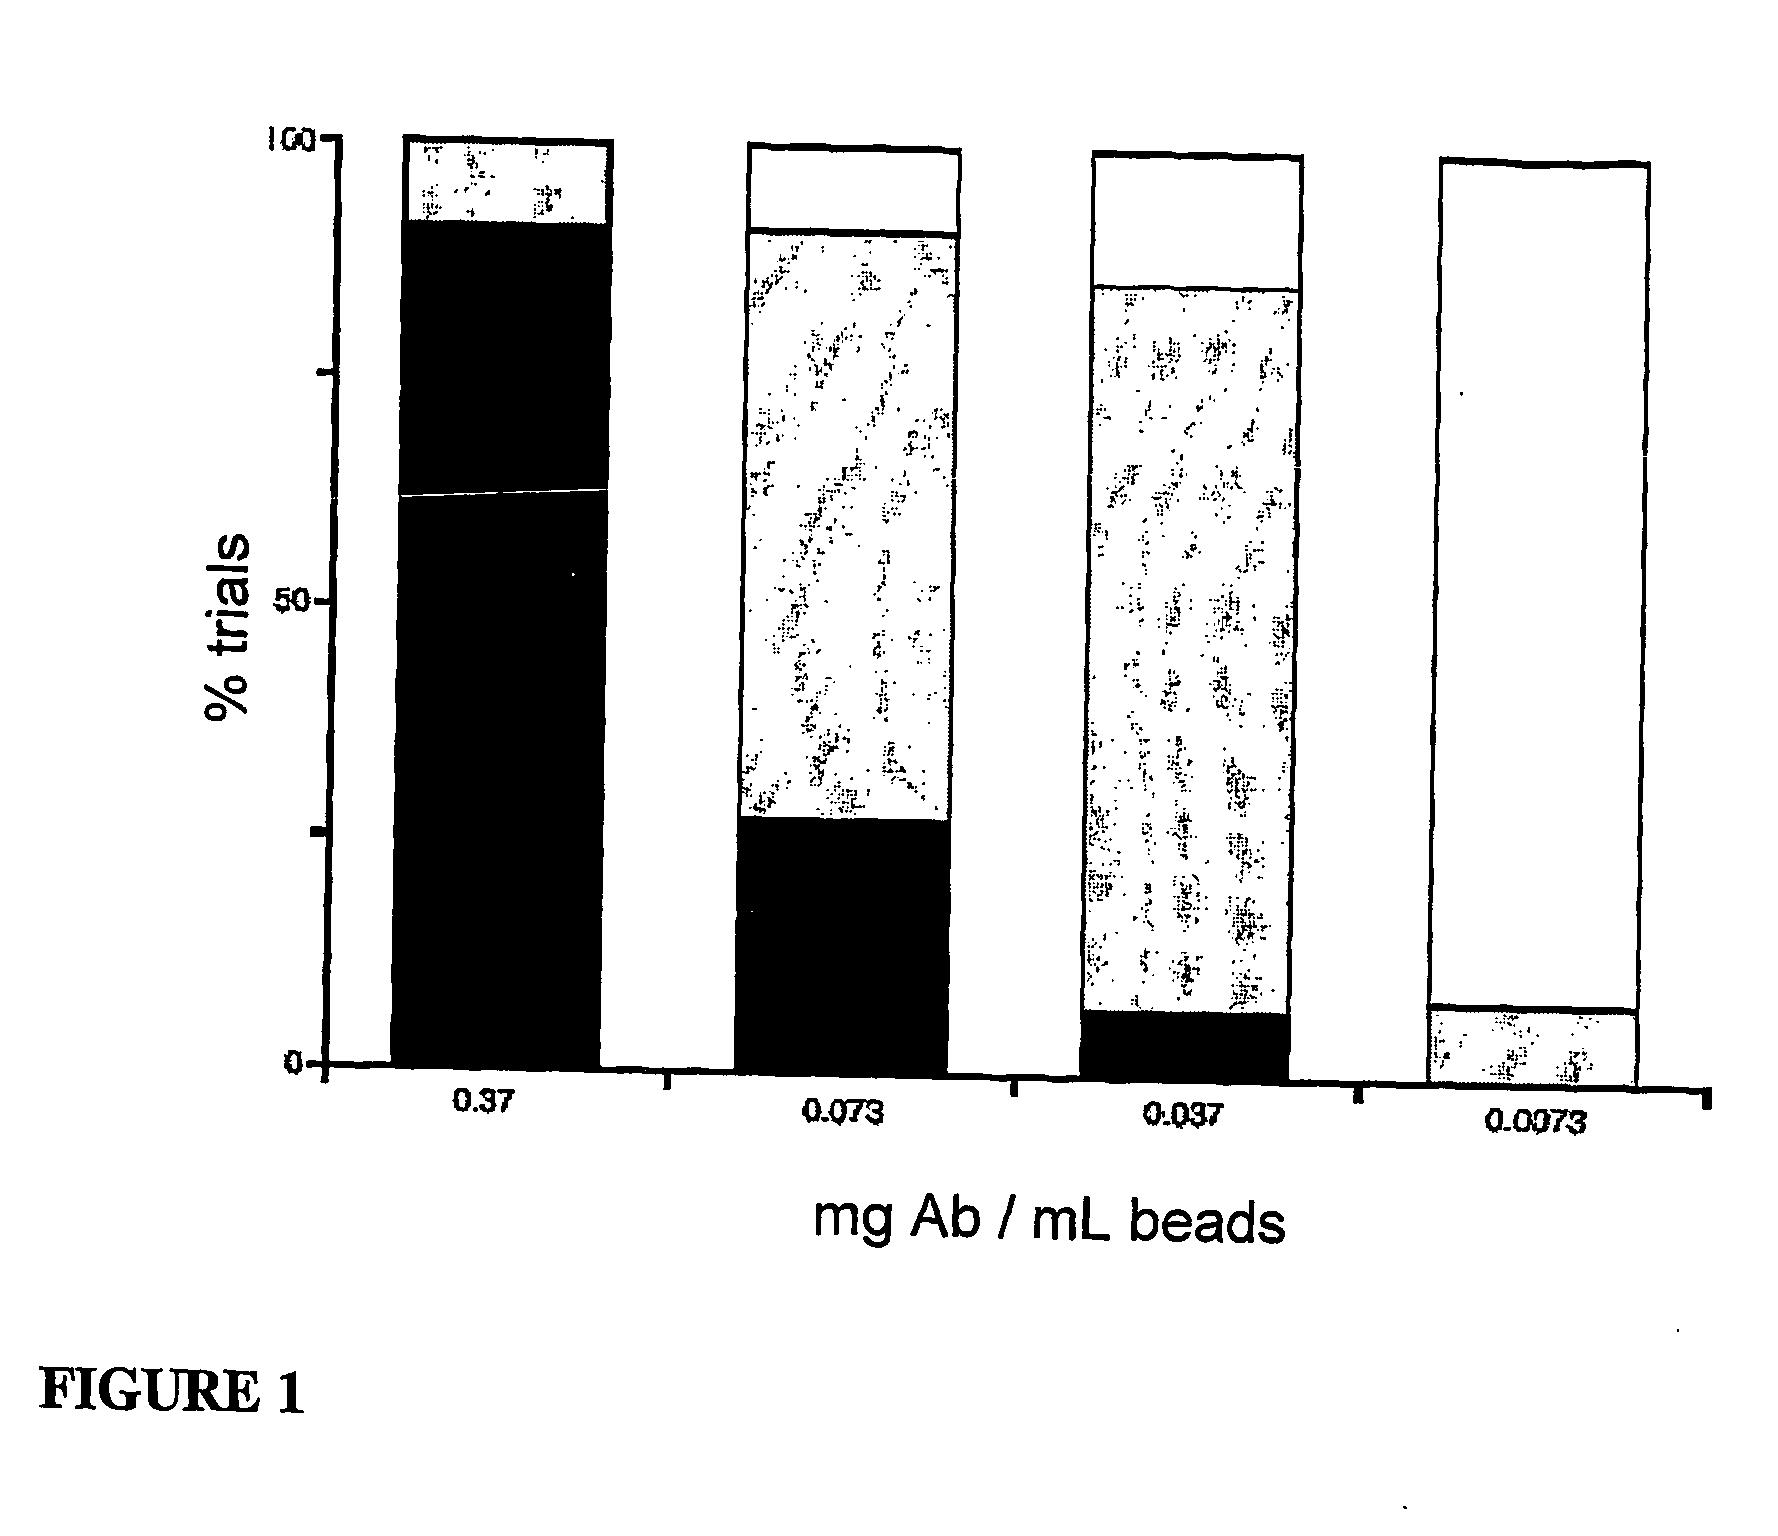 Methods and agents for treating axonal damage, inhibition of neurotransmitter release and pain transmission, and blocking calcium influx in neurons